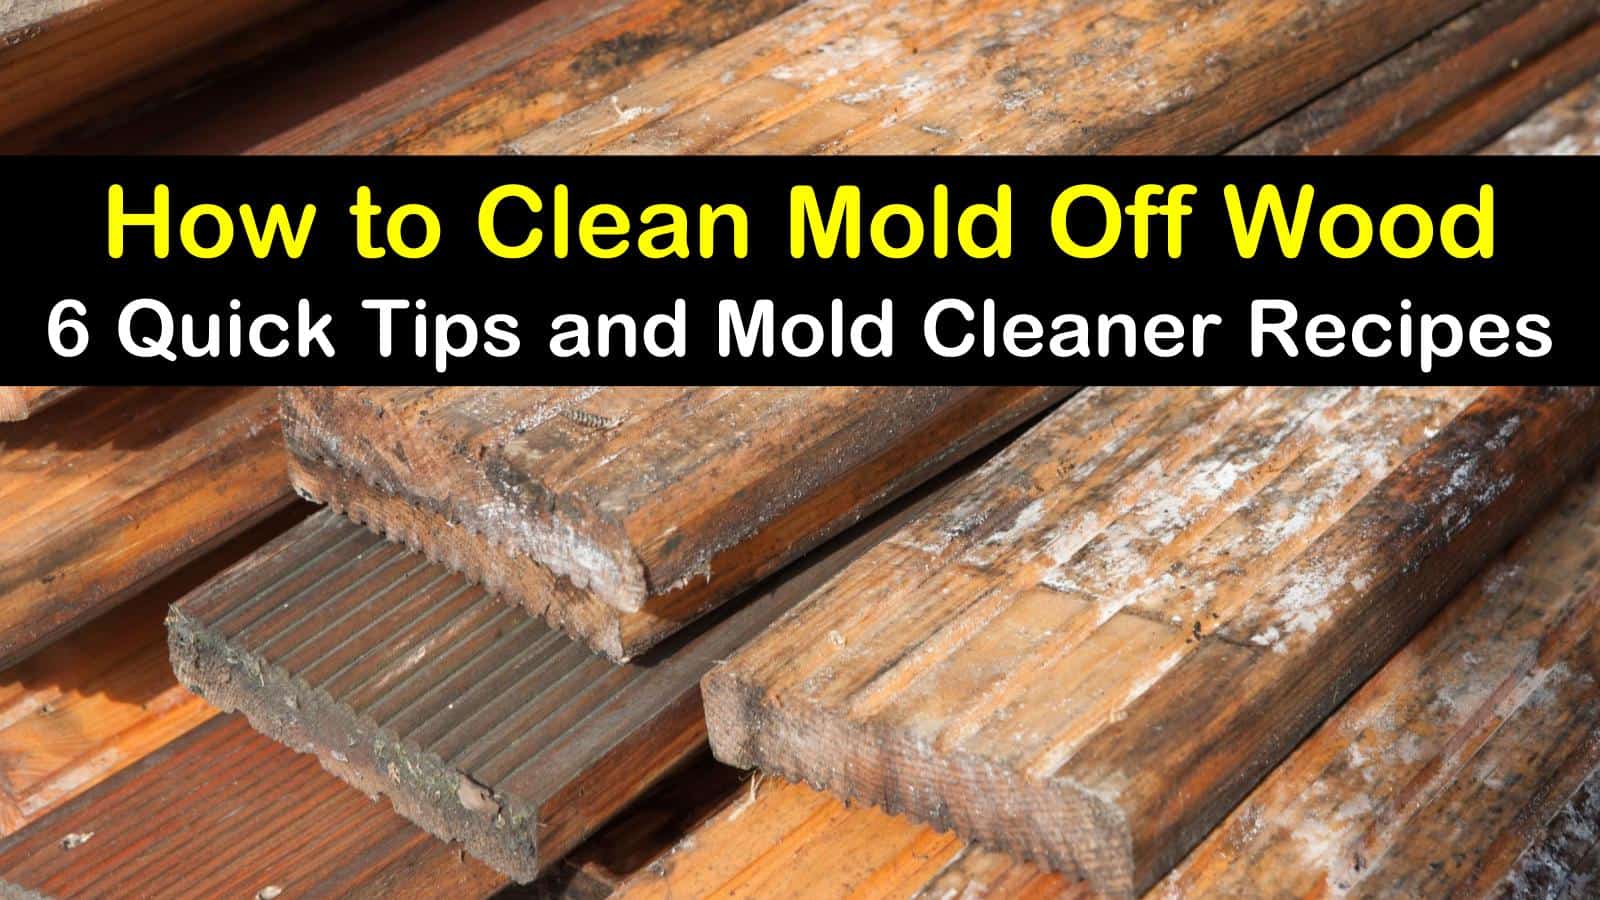 How do you treat mold on wood framing?